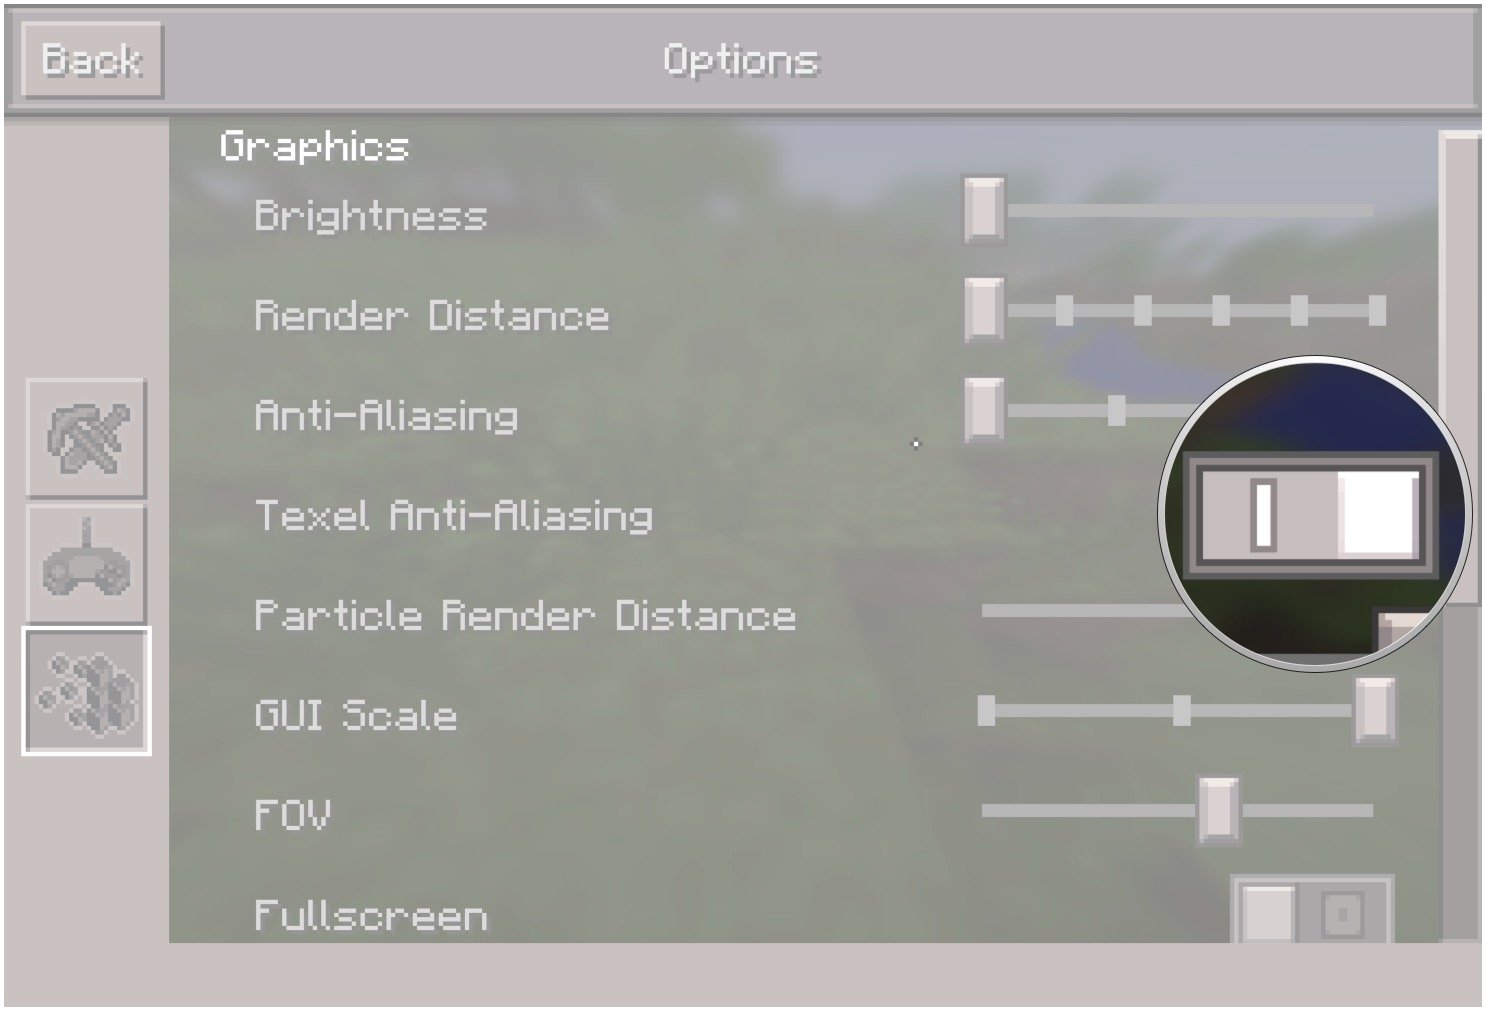 Click the button to turn off texel anti-aliasing.